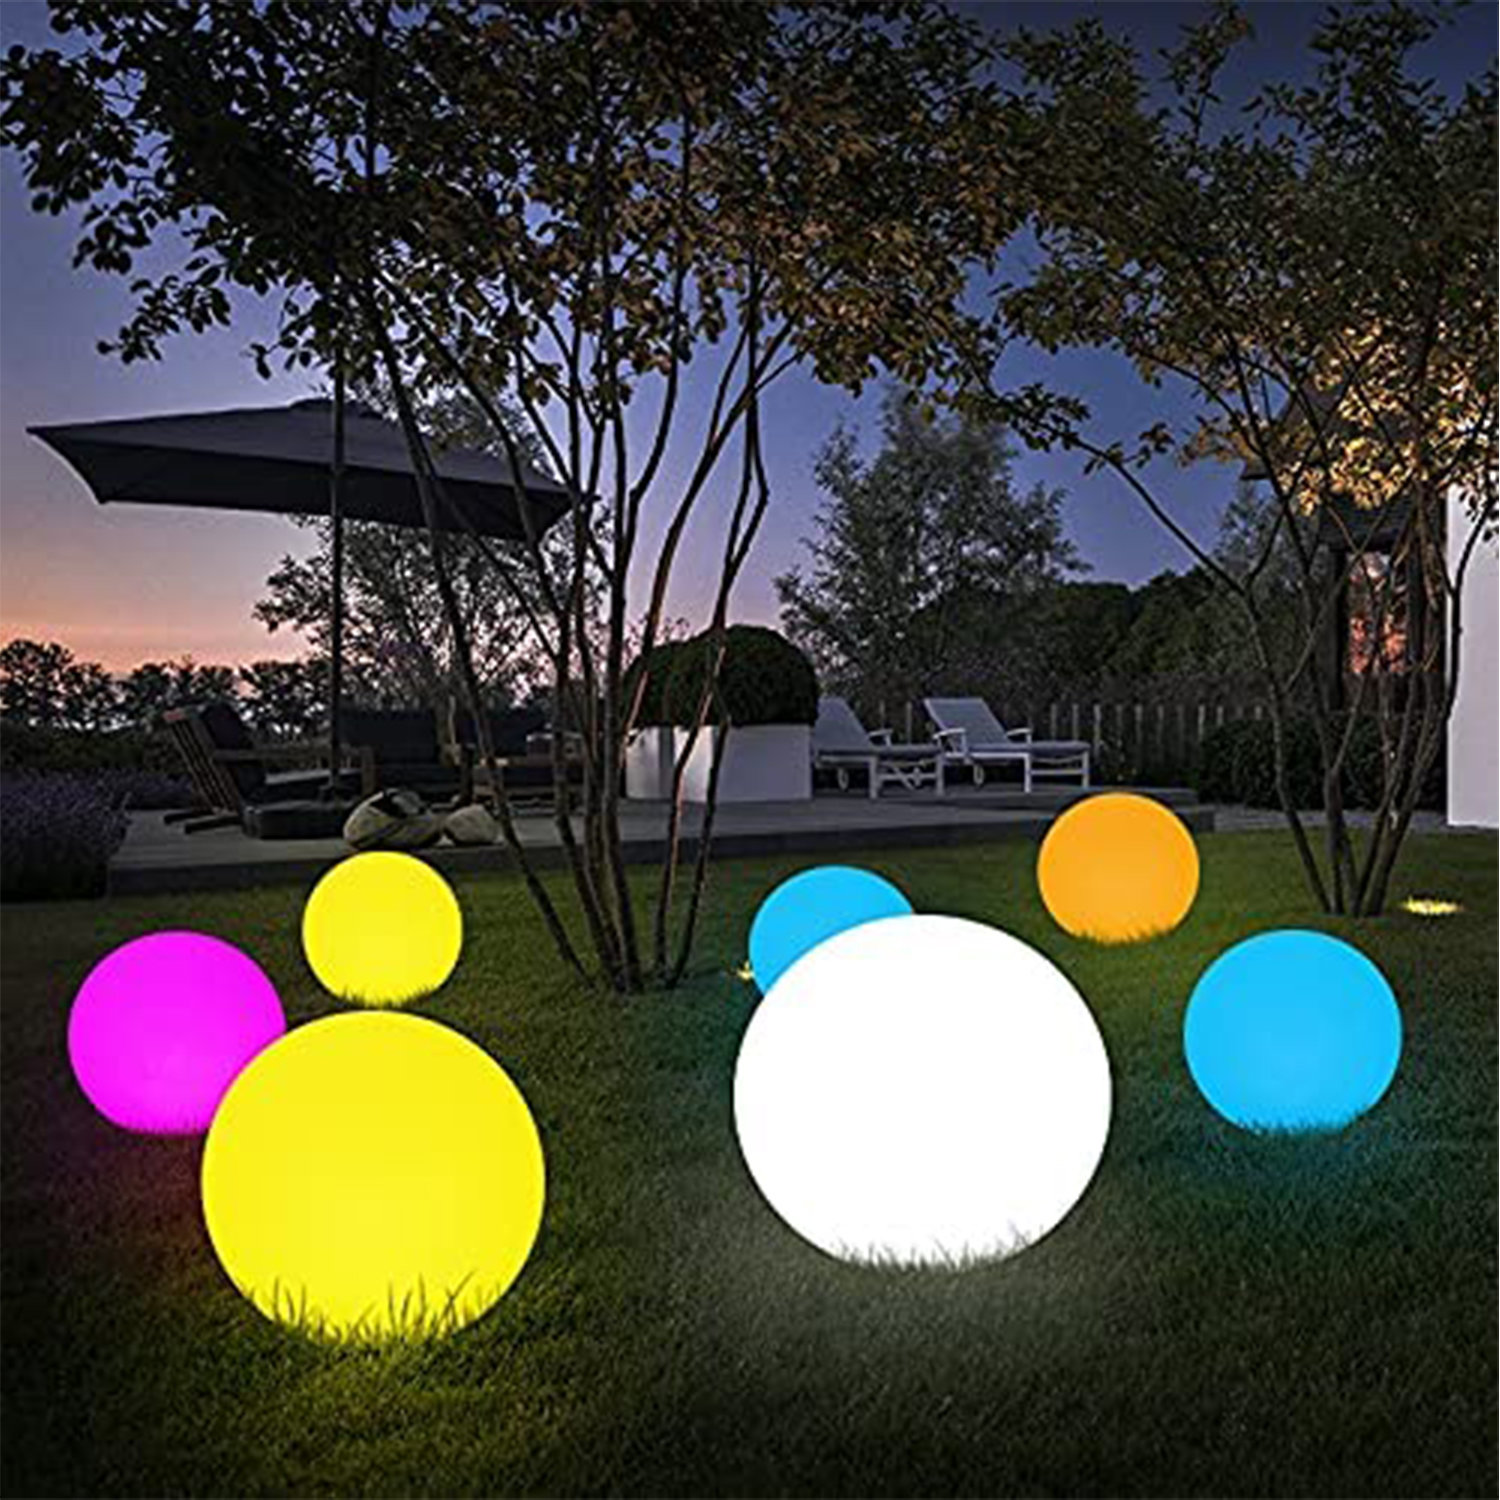 1 Pack Toilet Night Lights, 16 Color Changing LED Nightlights with